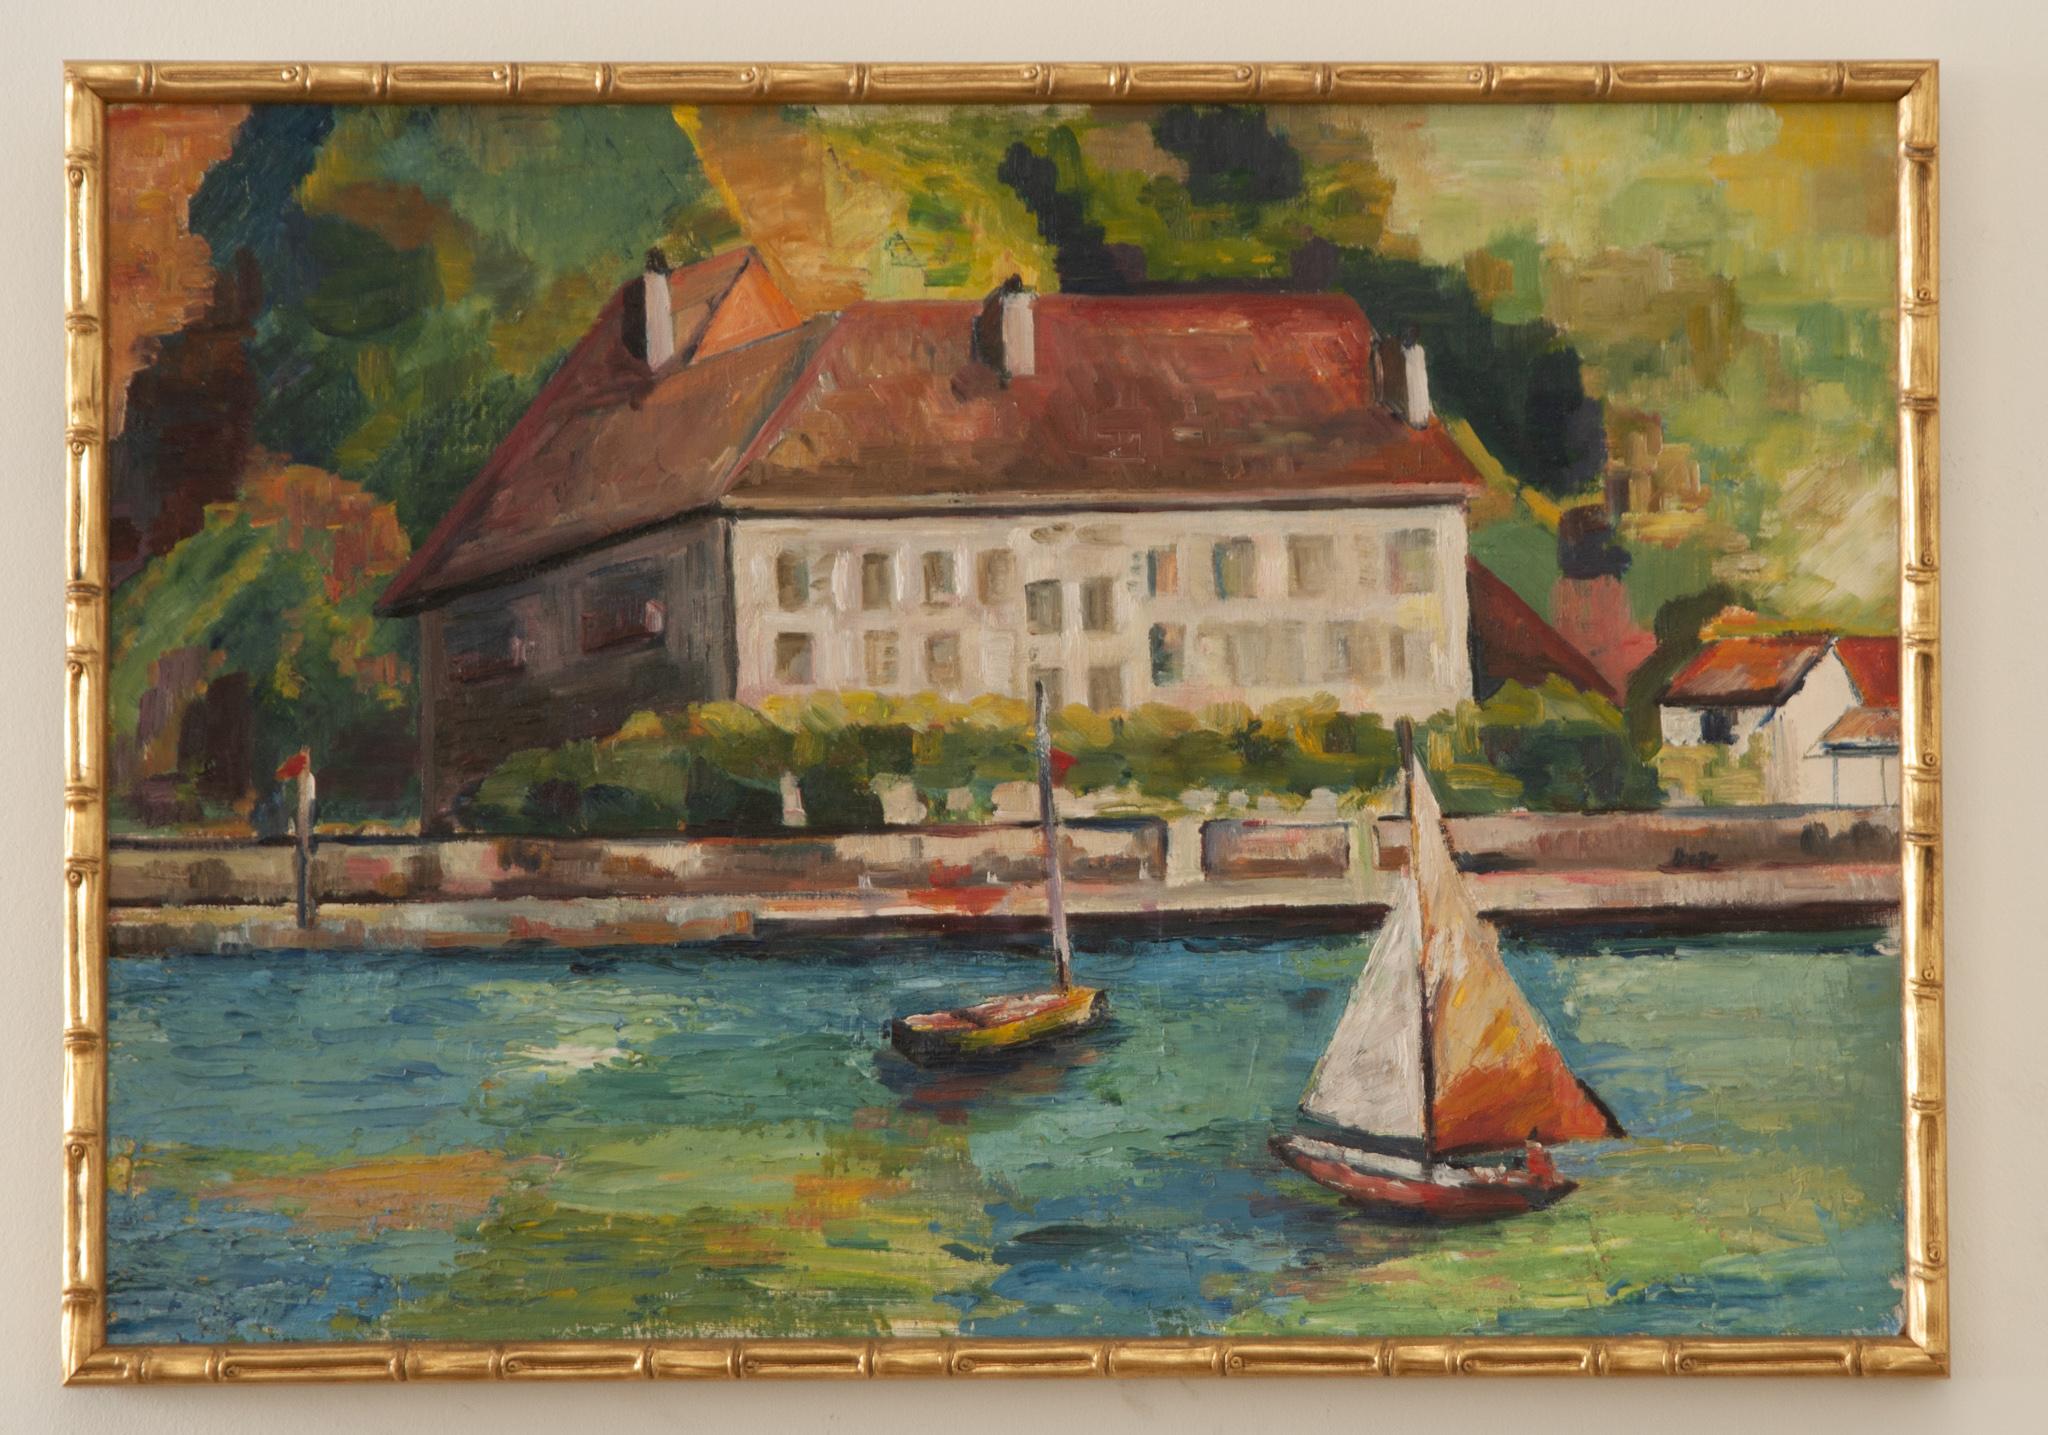 An English 20th century oil painting of a nautical scene recently framed in attractive gilded faux bamboo. This artwork depicts a lush riverside setting with boats on the water in front of a large European house or hotel. Rendered in the